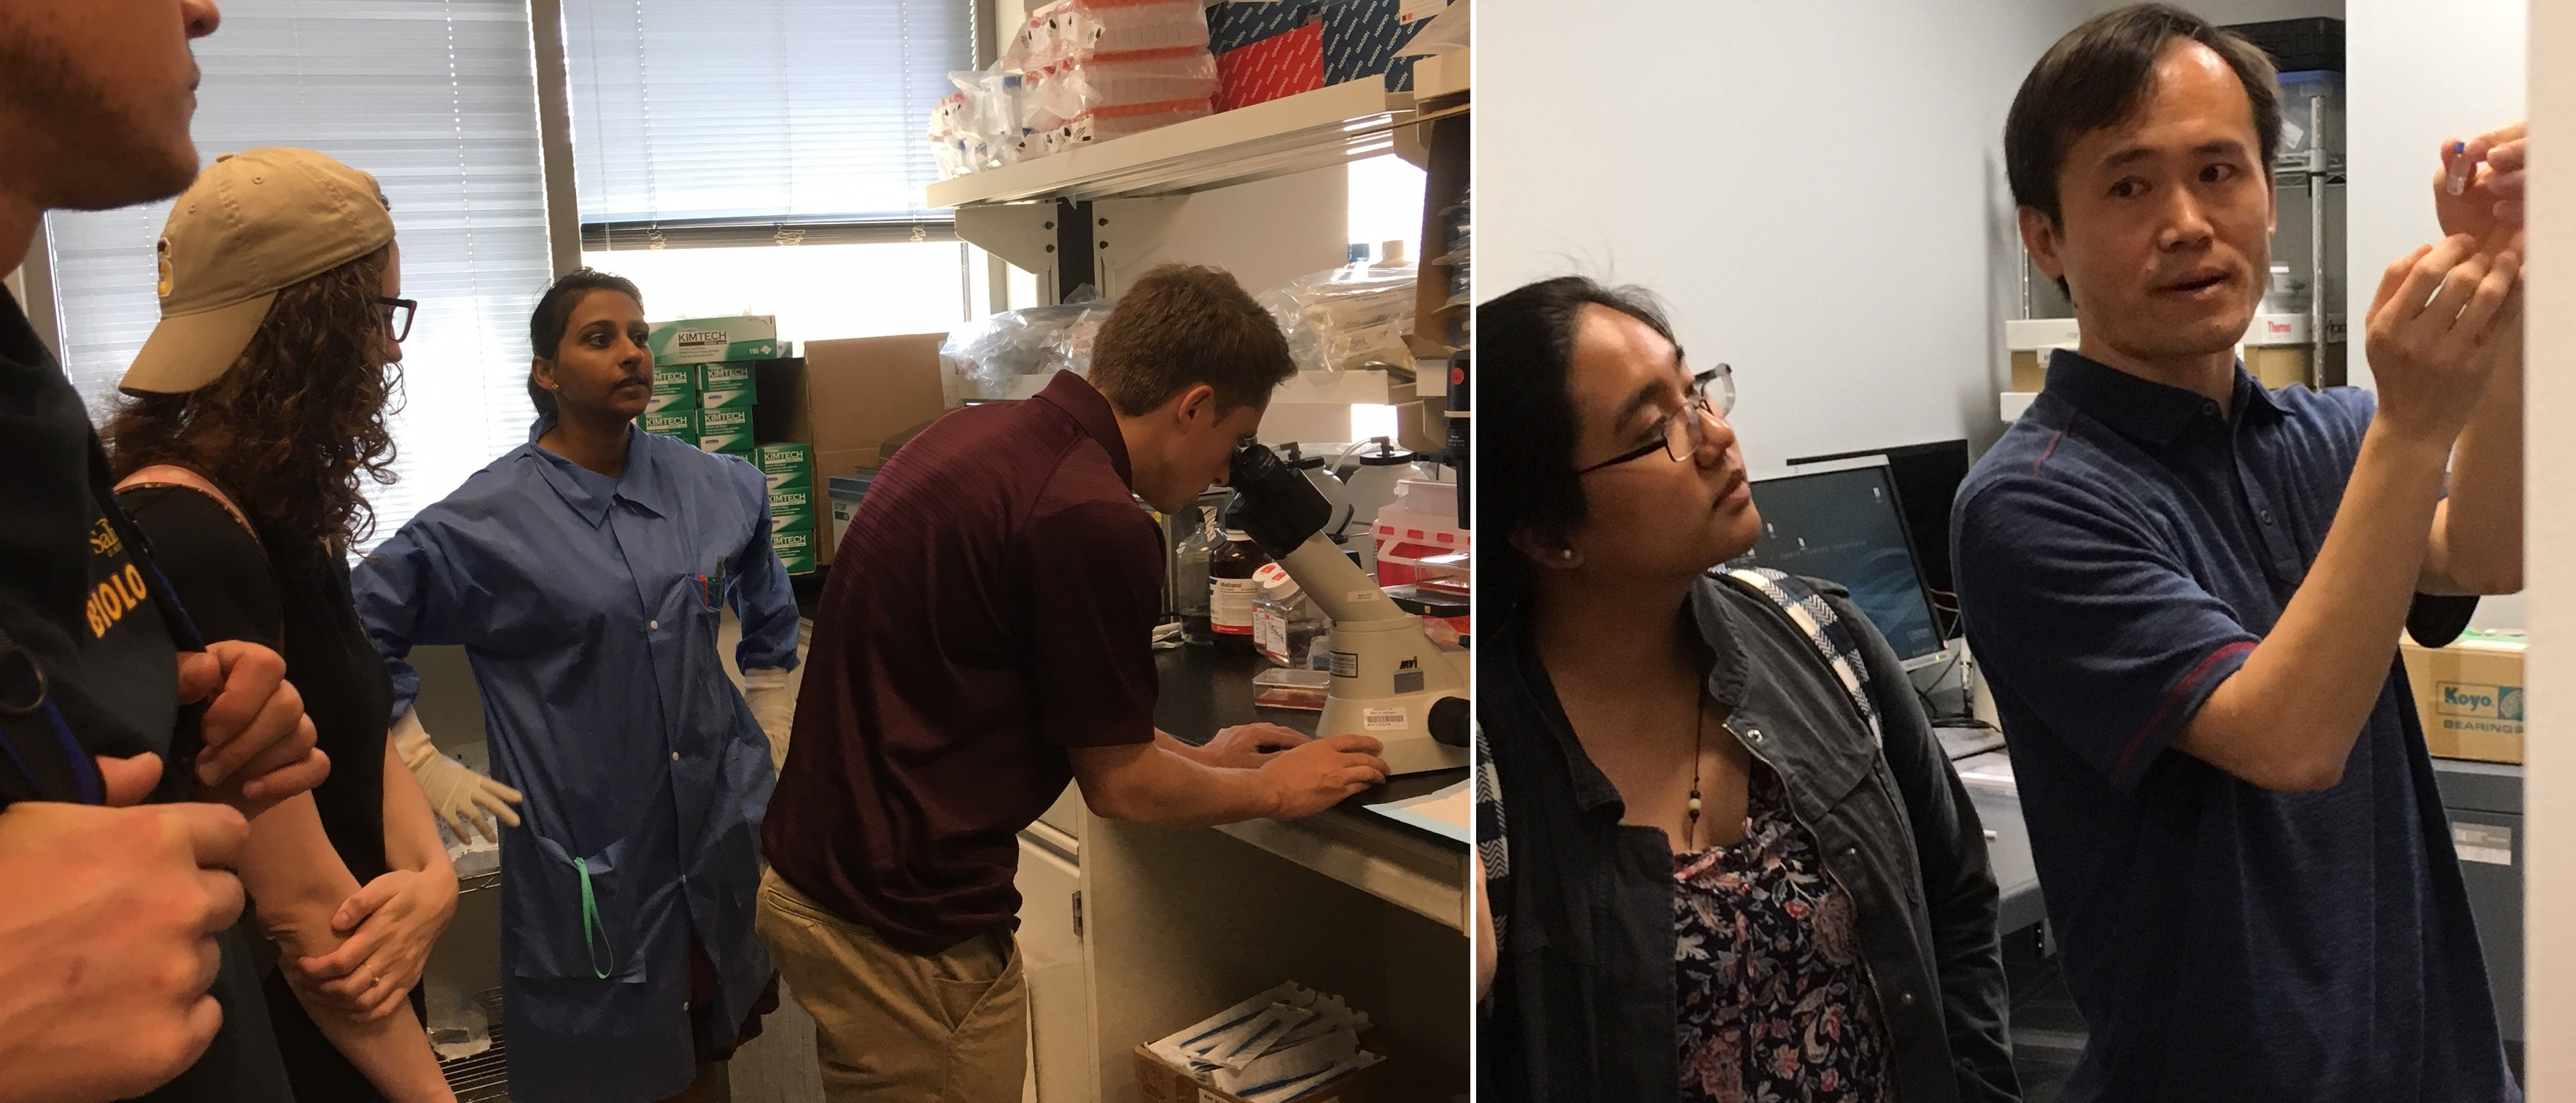 Students from Salisbury University tour JCVI's Rockville lab. Left: Dr. Chandran shows the group mammalian cell lines. Right: Dr. Yu discusses mass spectroscopy.